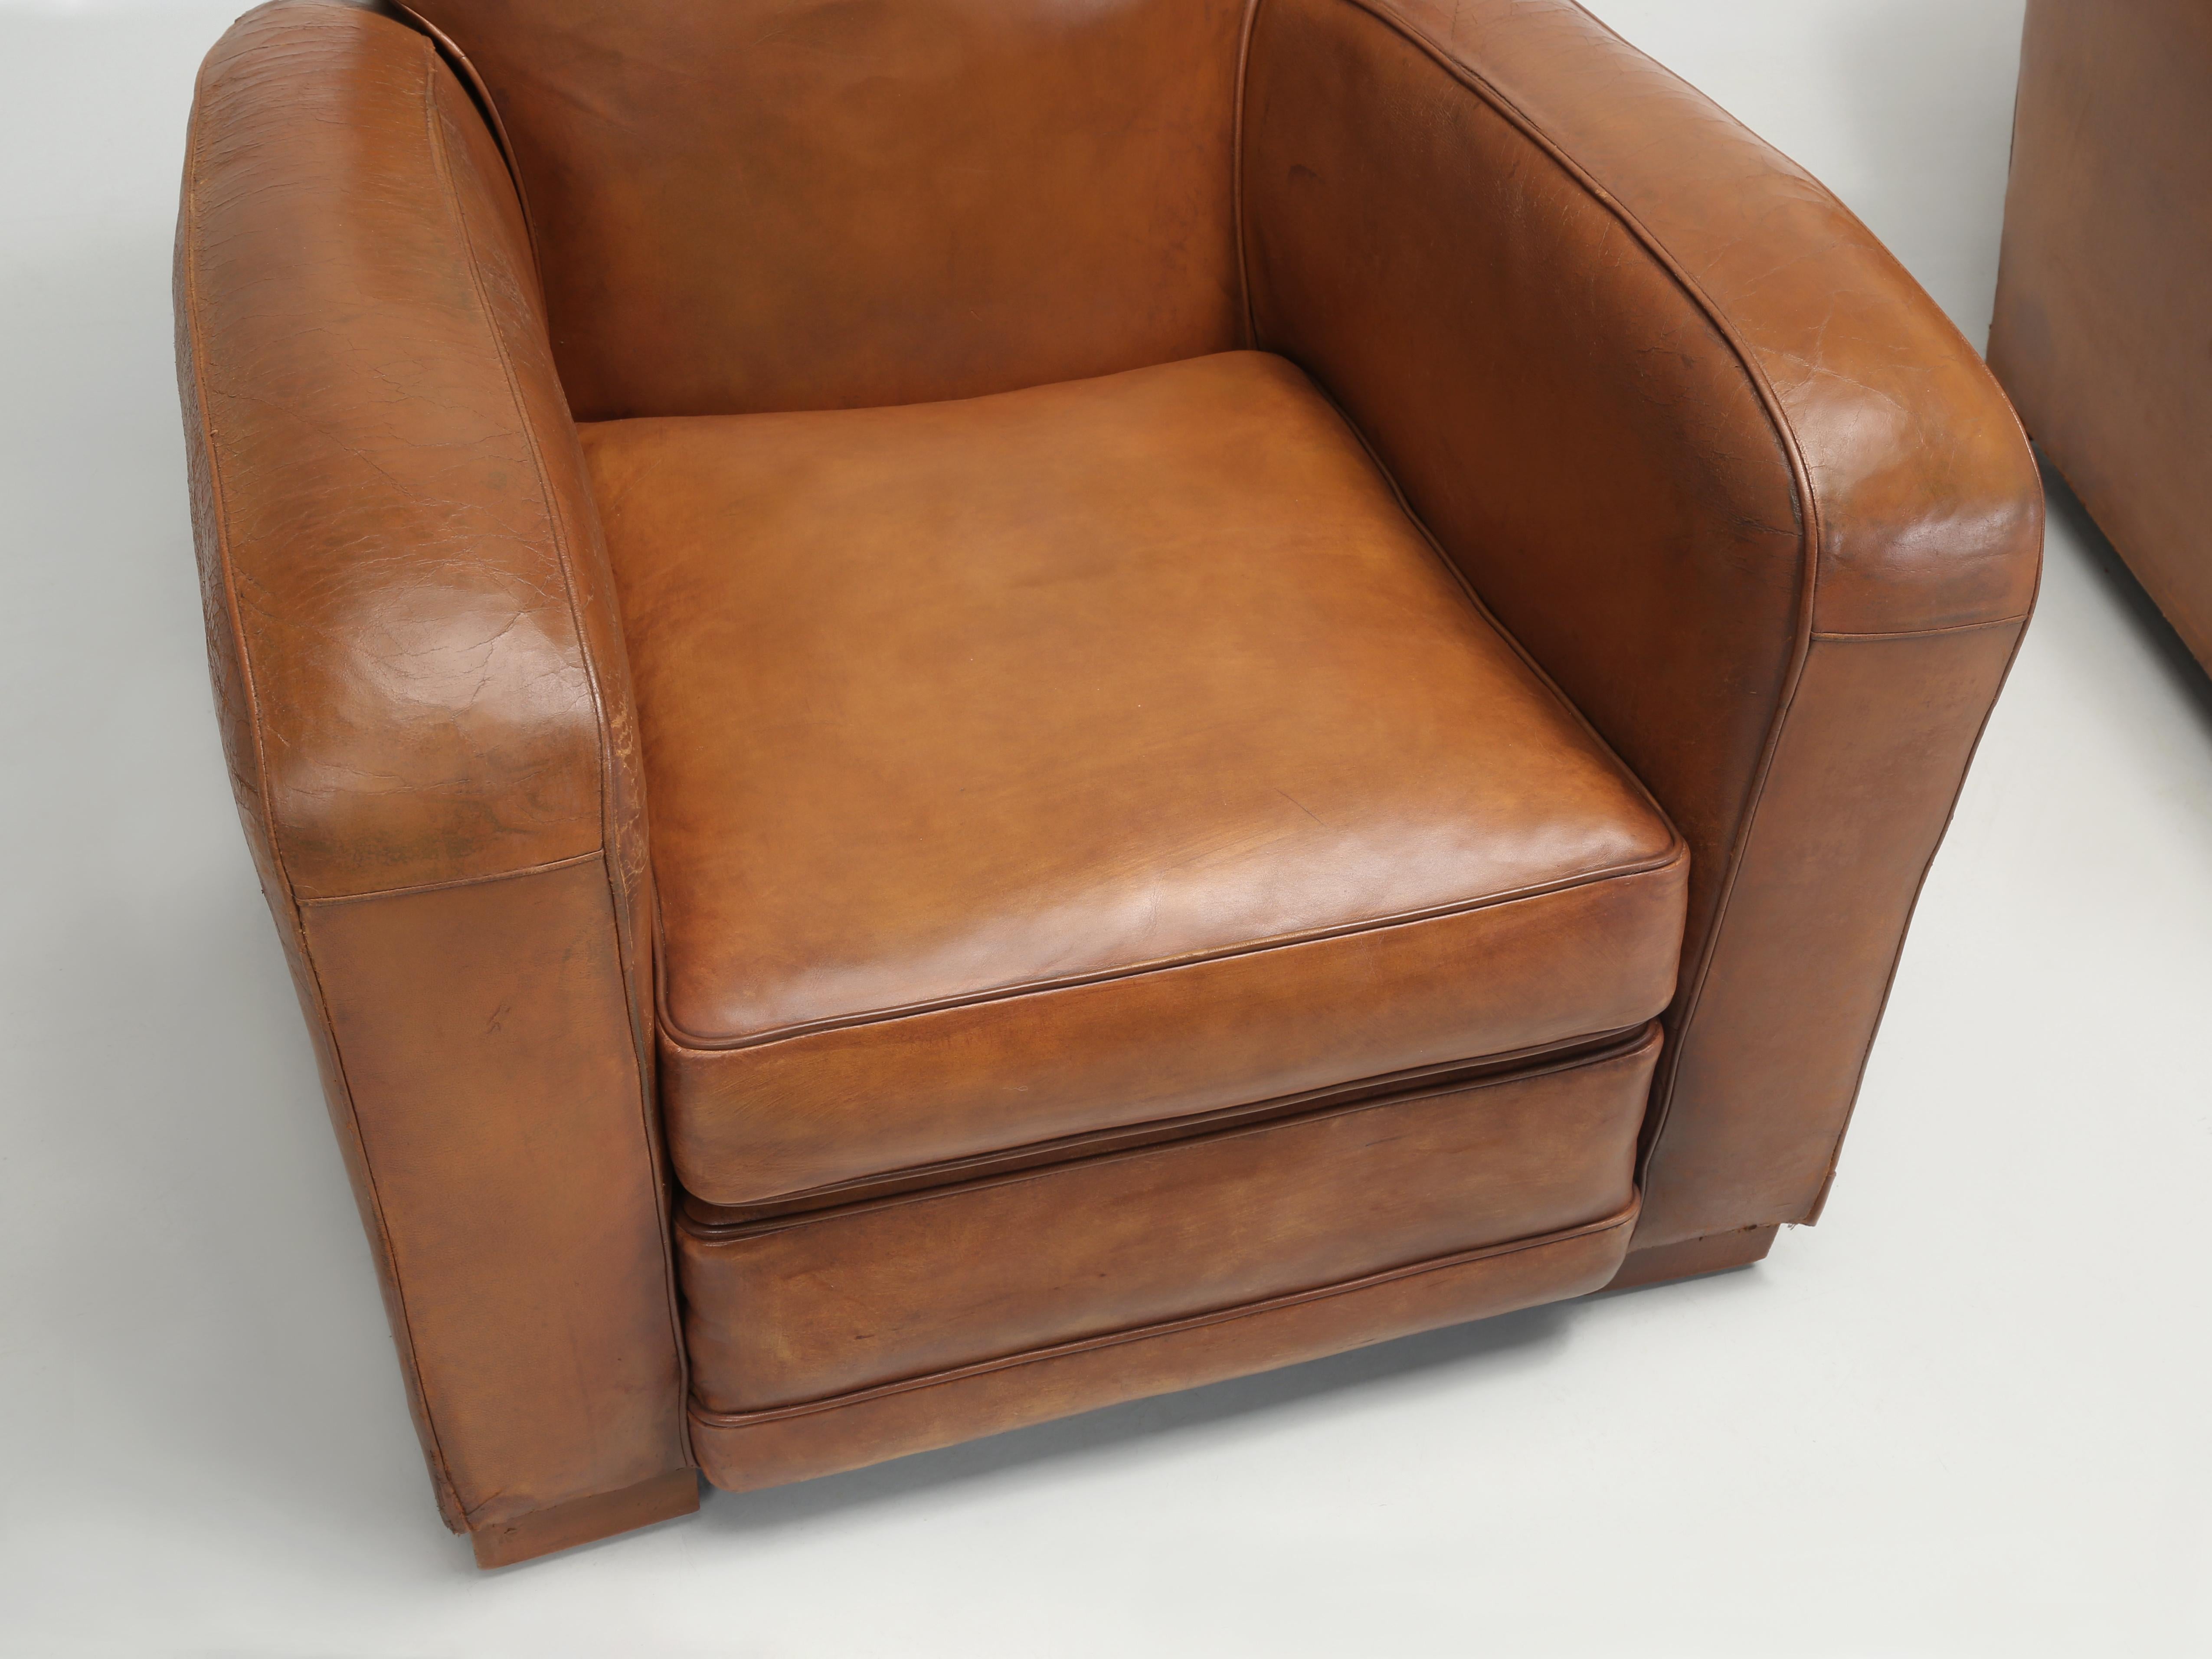 Mid-20th Century French Club Chairs Original Leather Completely Restored Internally in Horsehair